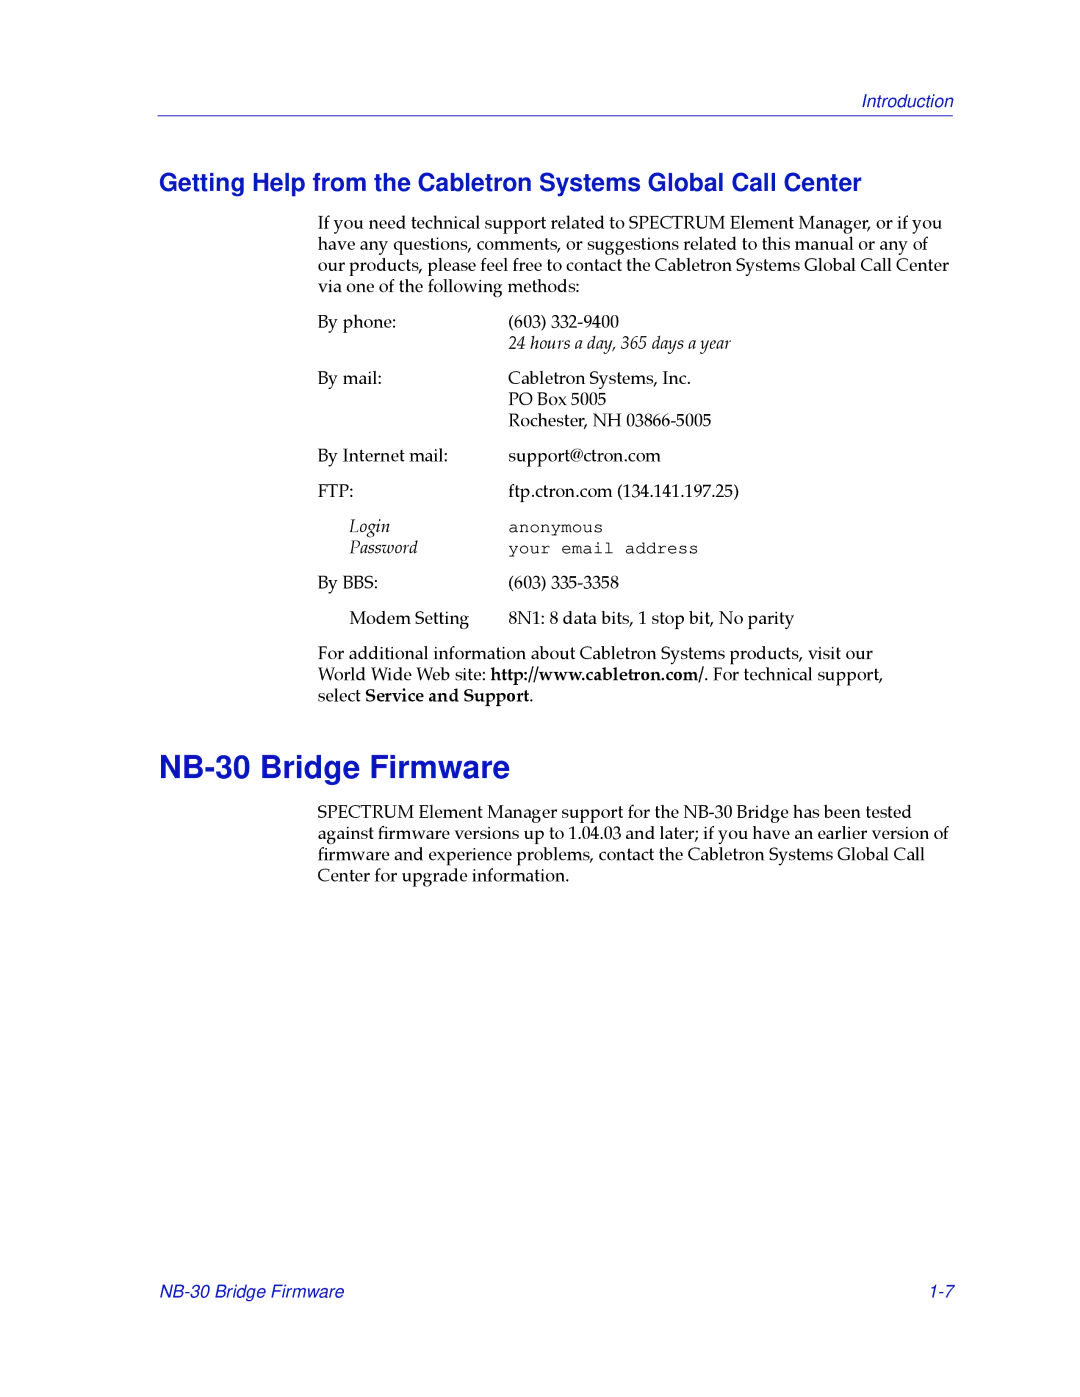 Cabletron Systems NB30 manual NB-30 Bridge Firmware, Getting Help from the Cabletron Systems Global Call Center 